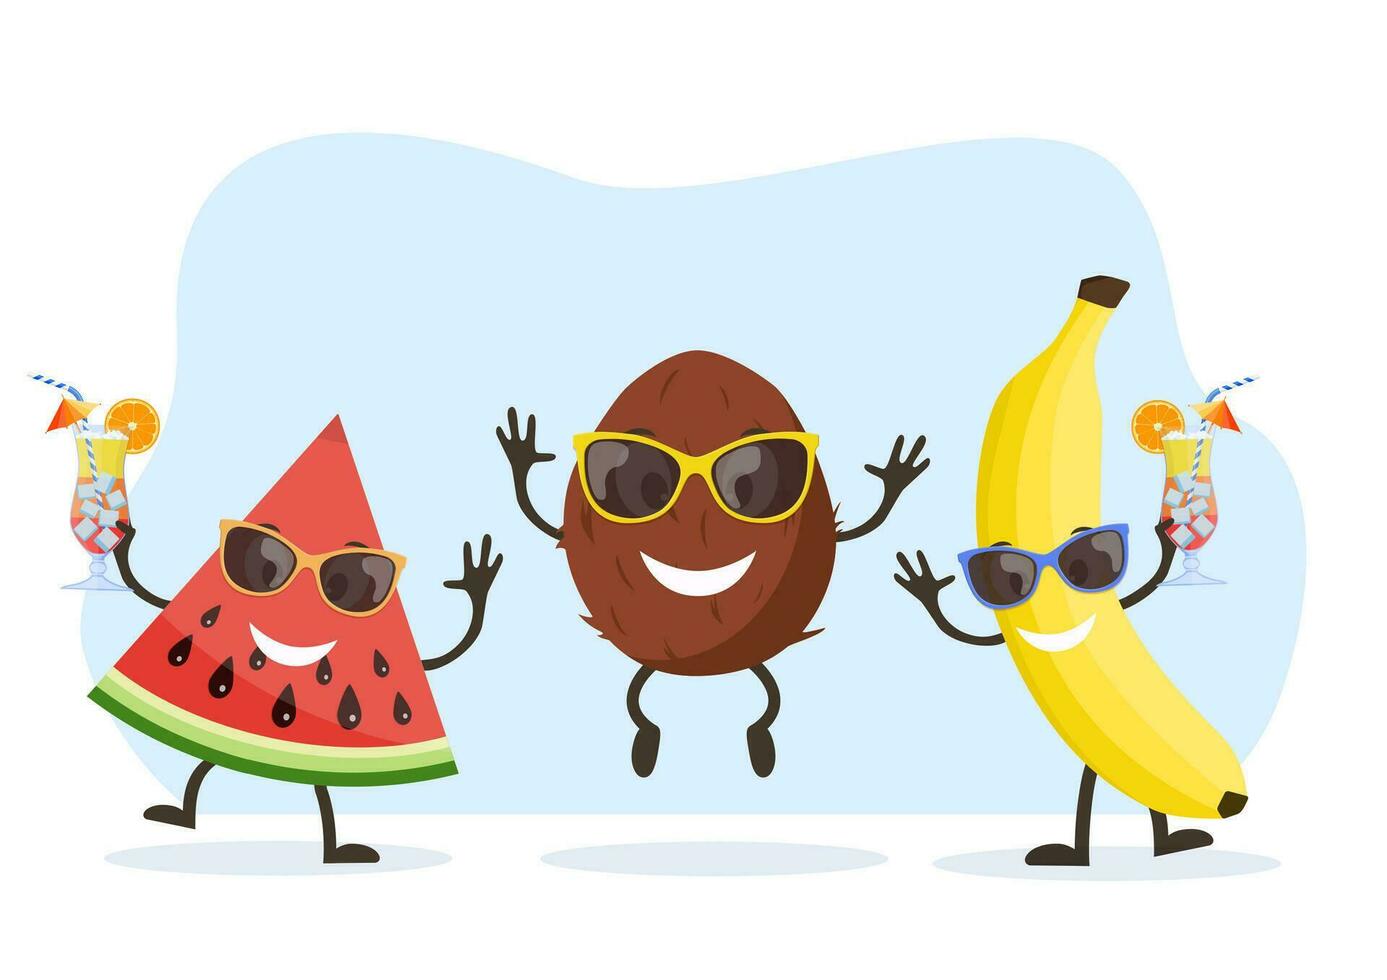 Funny watermelon, banana and Coconut character with human face and cocktail glass having fun at party. Colorful summer design. Vector illustration in flat style